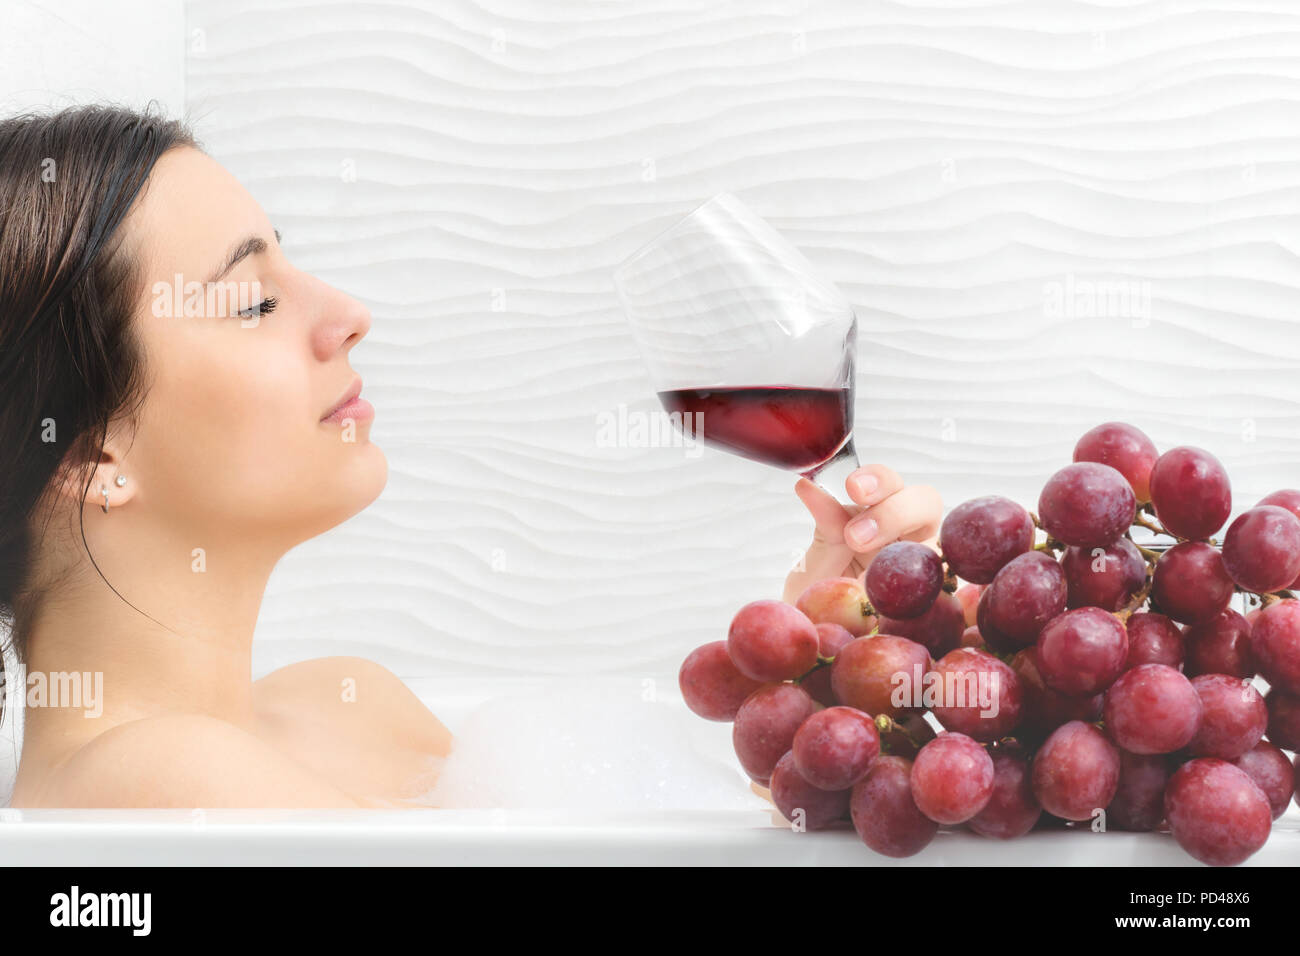 Close up portrait of young woman relaxing in foam bath with red wine and bunch of red grapes.Girl holding glass with red wine. Stock Photo